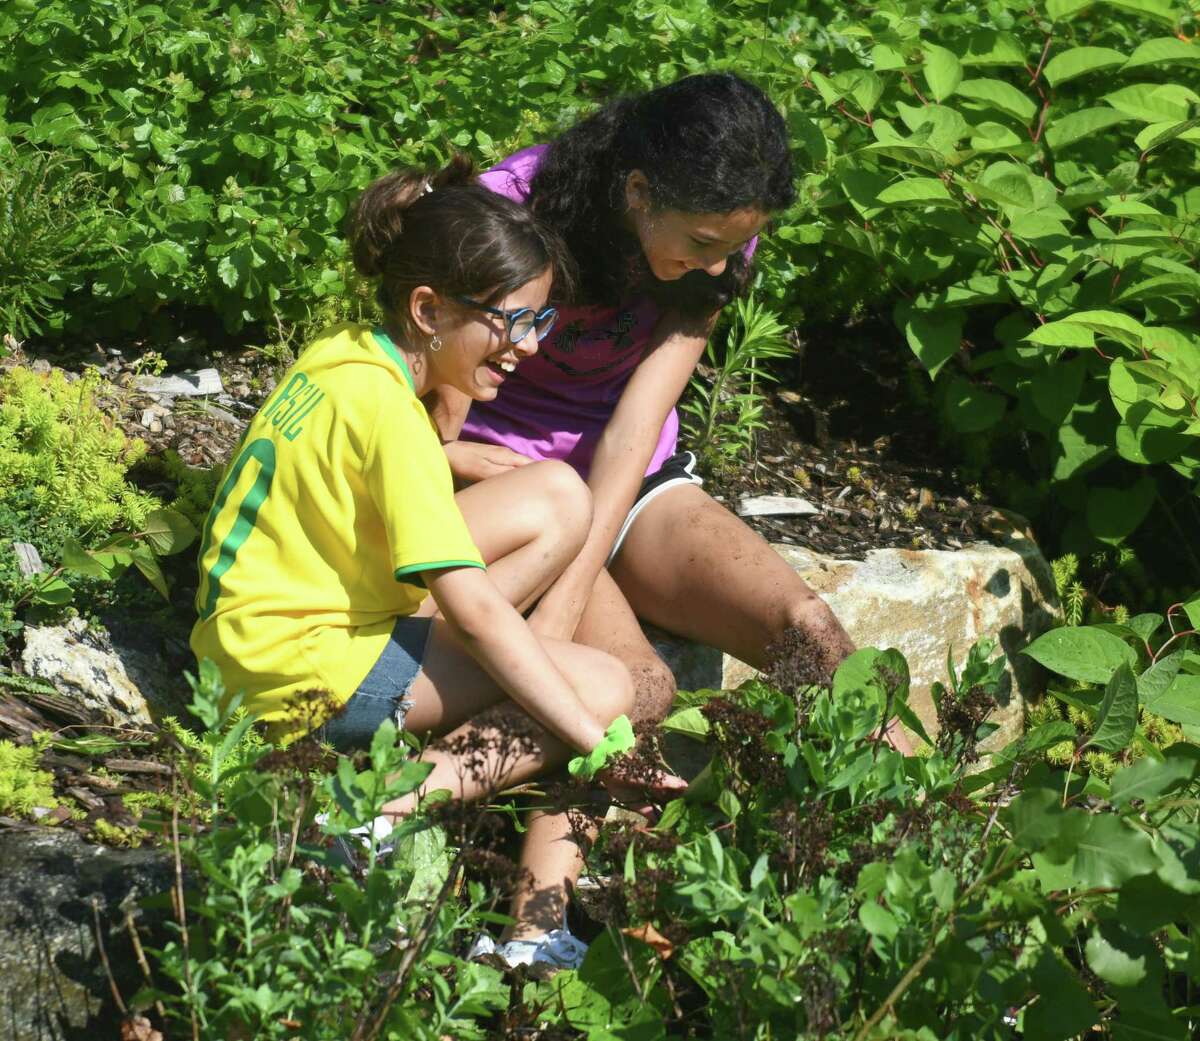 Fifth-graders Livia Cassiano, left, and Victoria Ramos pull weeds from the garden outside New Lebanon School in the Byram section of Greenwich, Conn. Monday, June 13, 2022. Greenwich Green & Clean teamed with New Lebanon fifth-graders to pull weeds, remove invasive species, and plant new flowers and plants to beautify the large garden near the school's entrance.